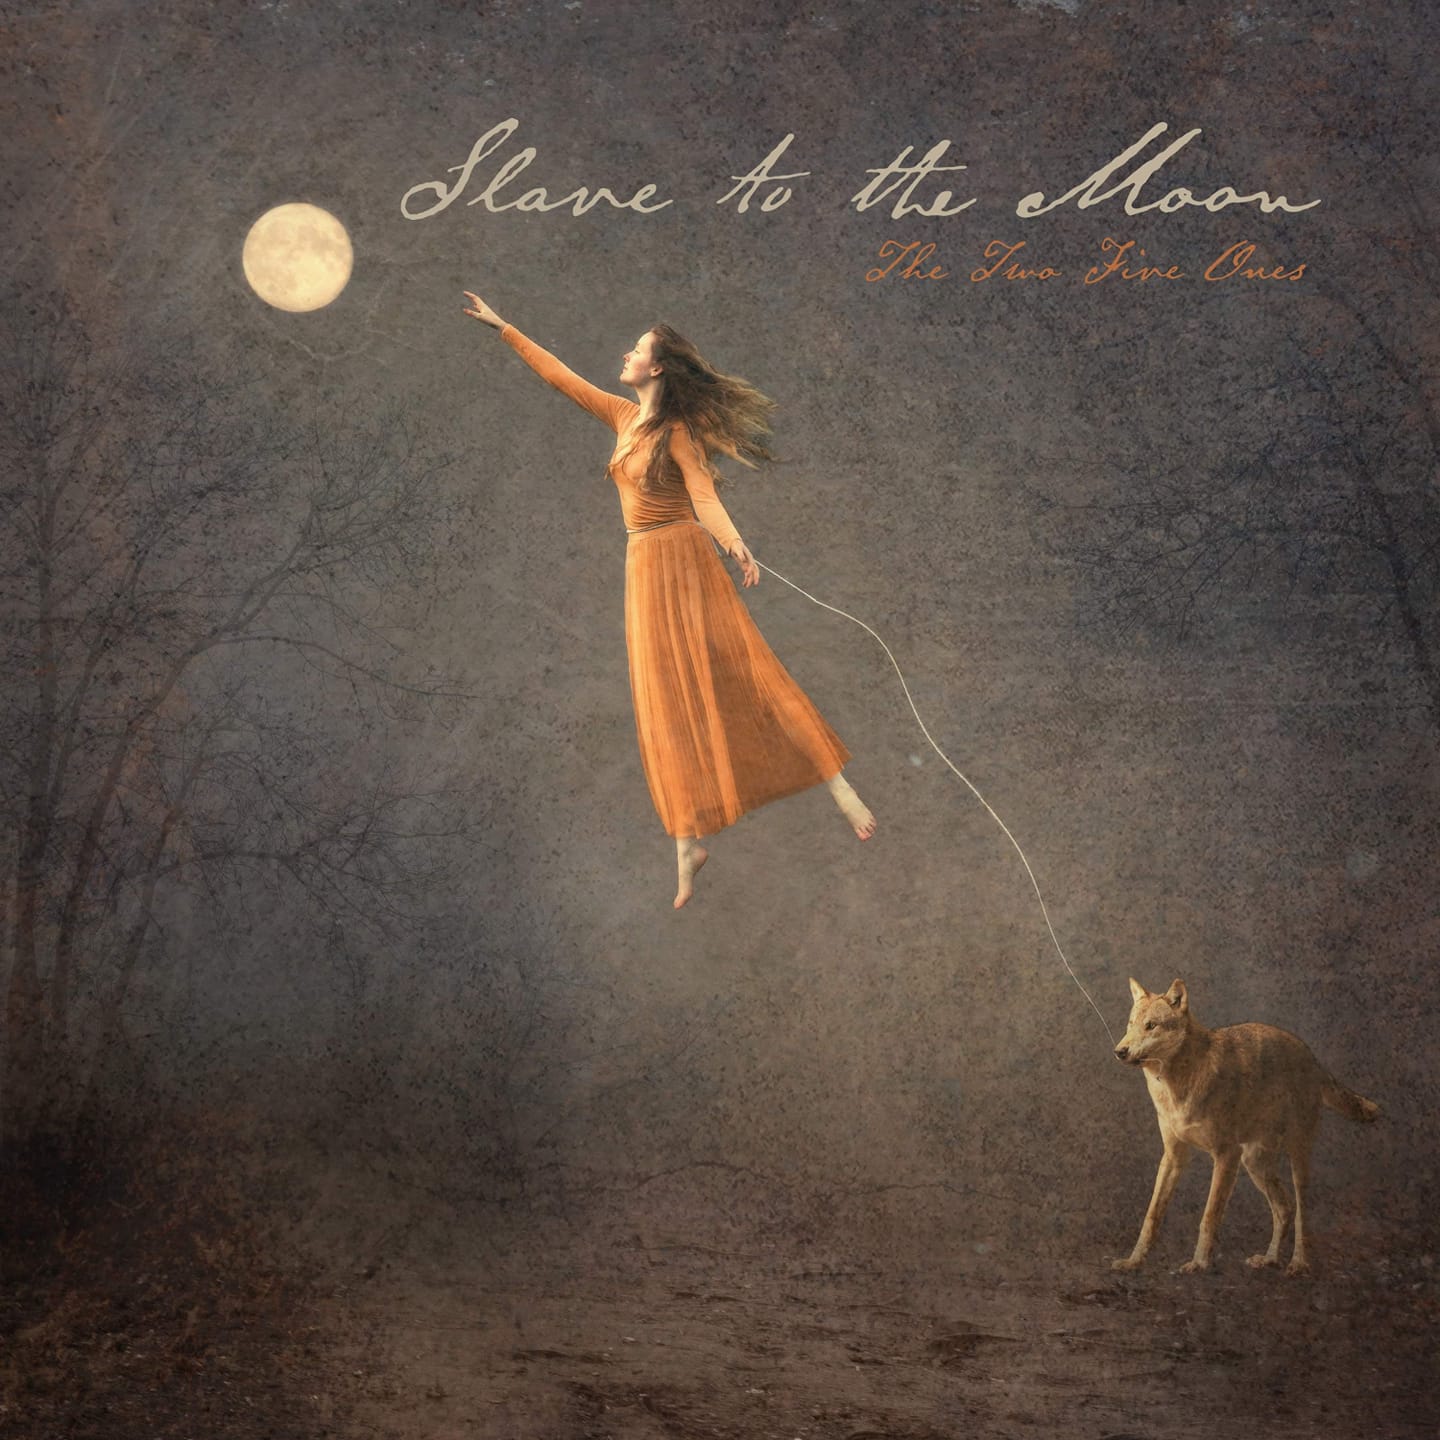 New Video Release “Slave to the Moon” from The Two Five Ones